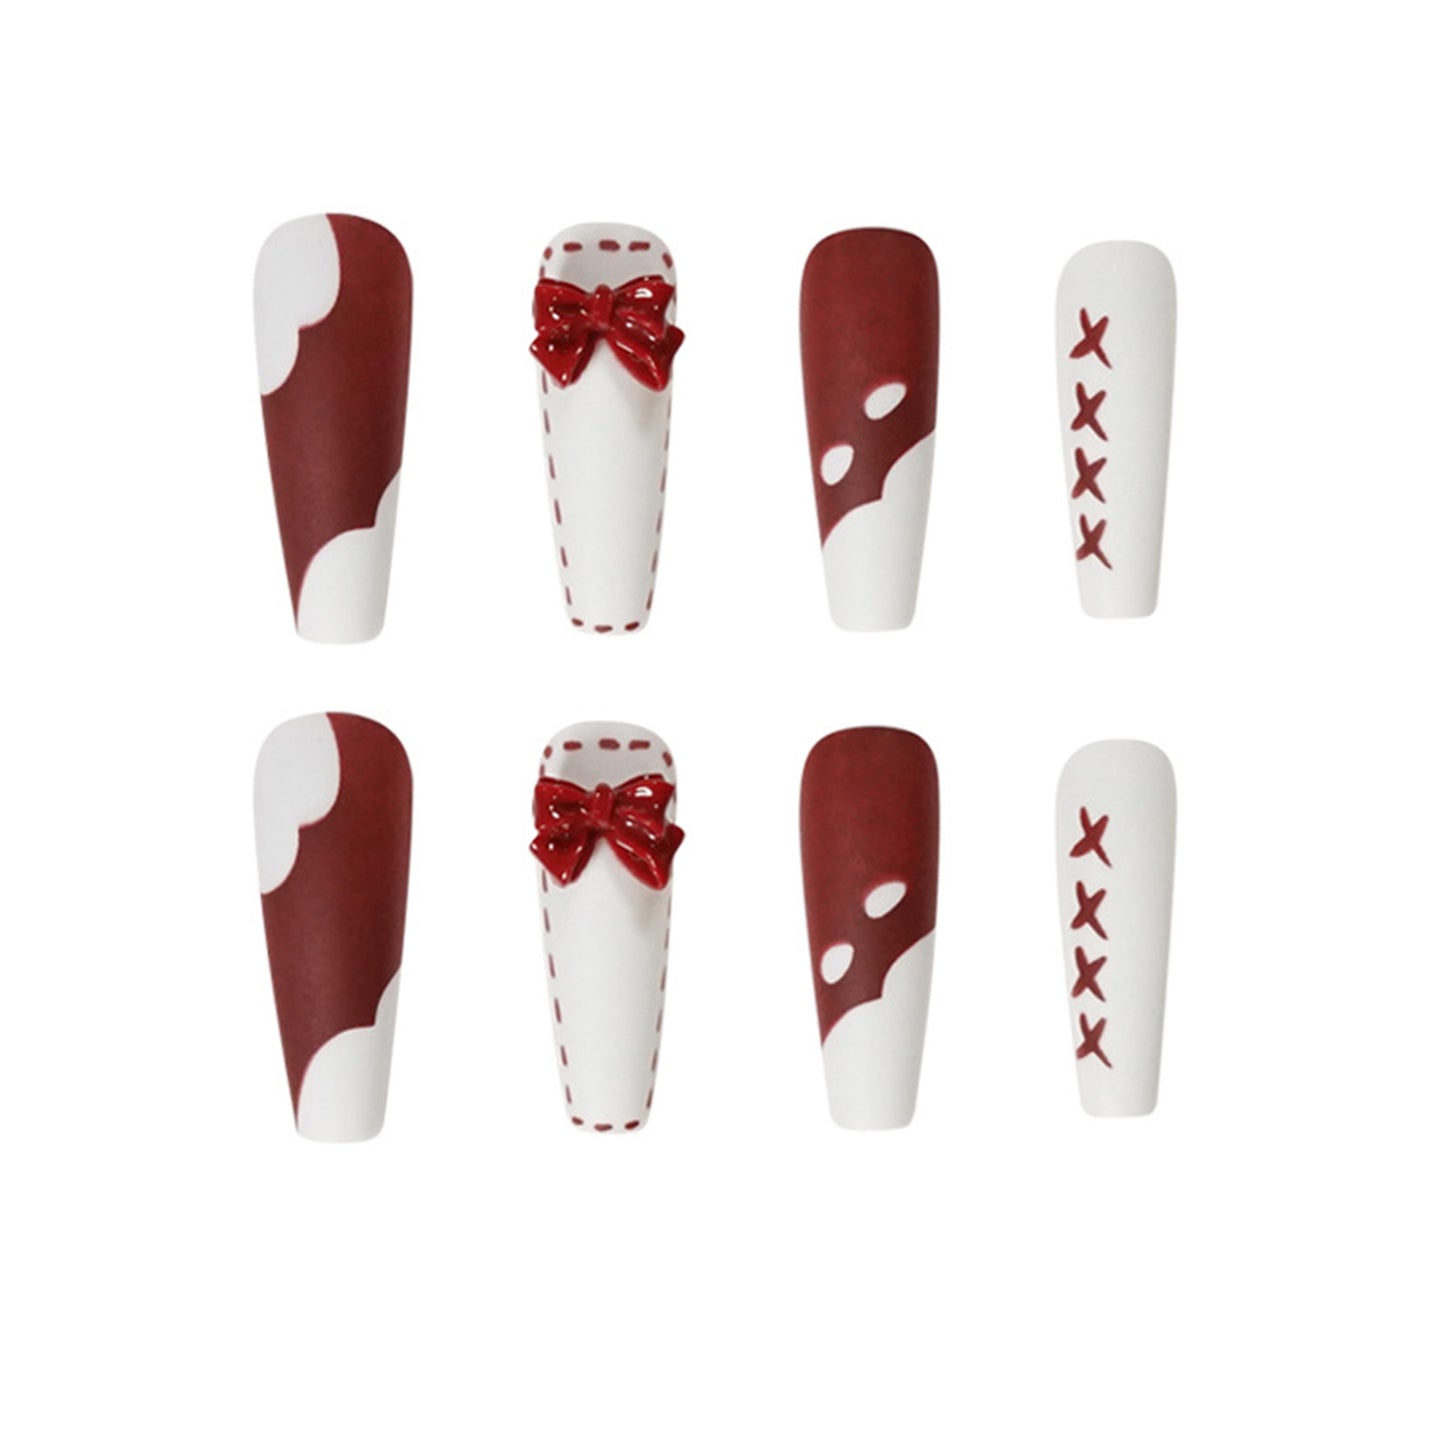 Matte Red and White Long Ballerina Press-on Nails